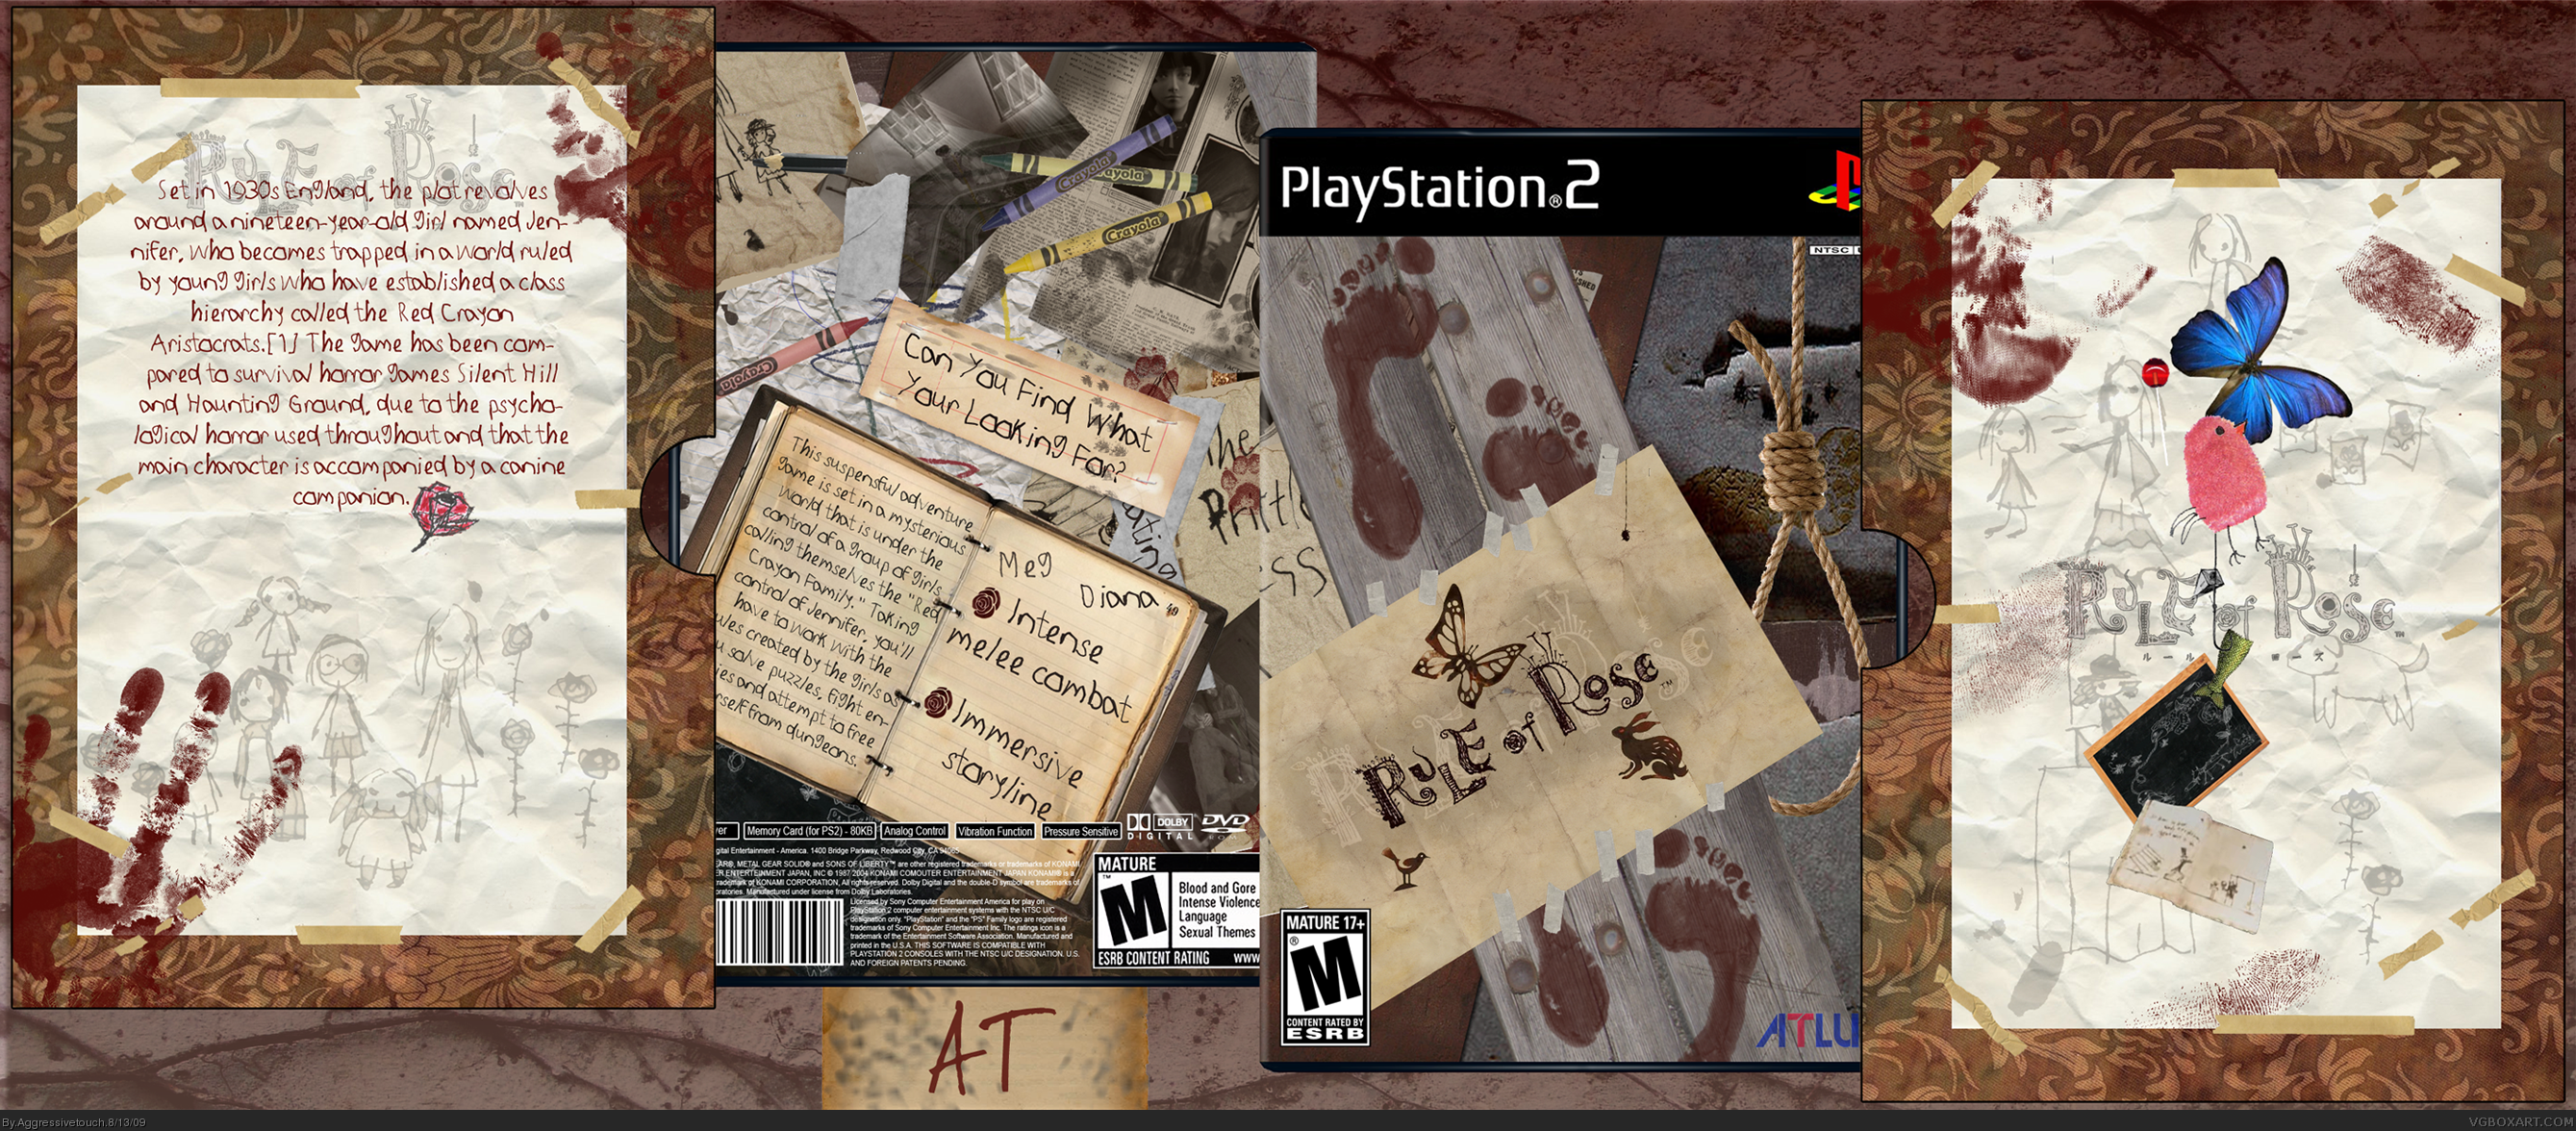 Rule of Rose box cover